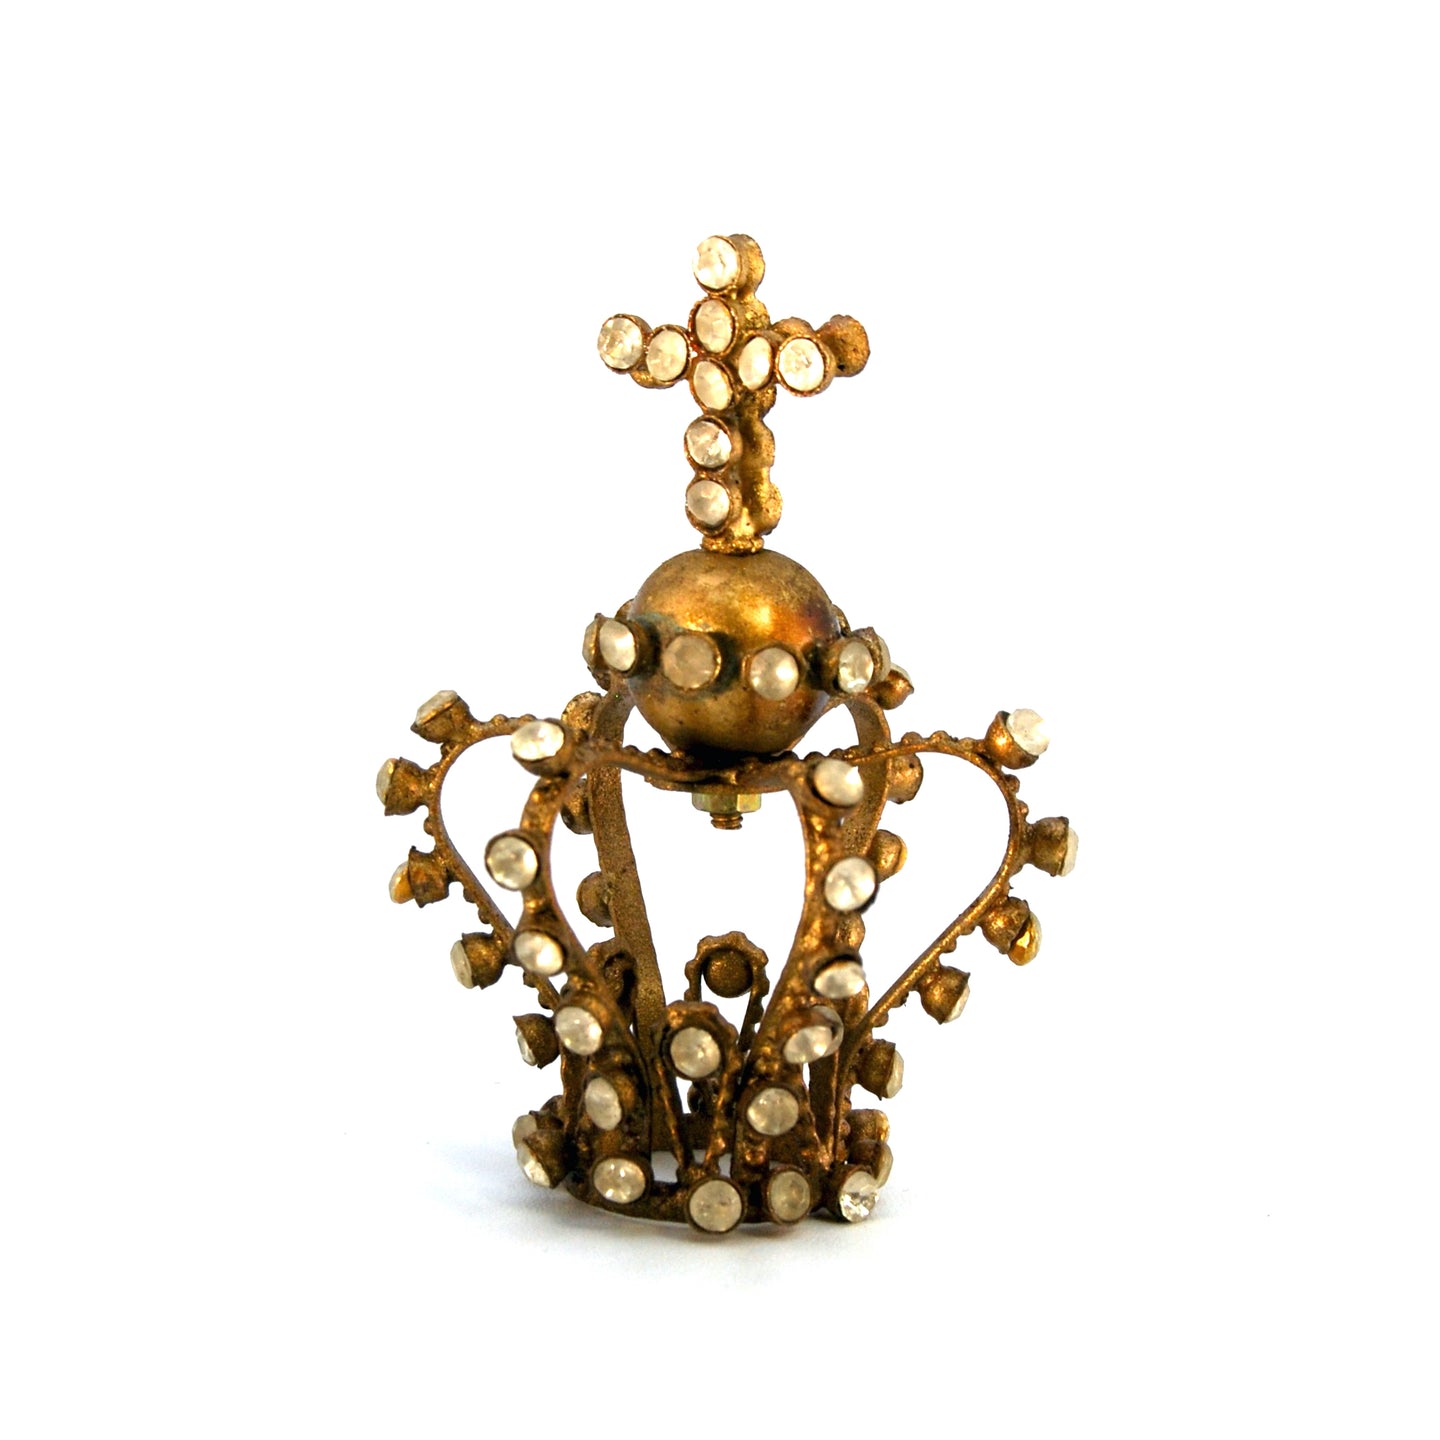 Tiny Jeweled Santos Kings Crown, Ornate Antique Gold Rhinestone Orb and Cross Motif